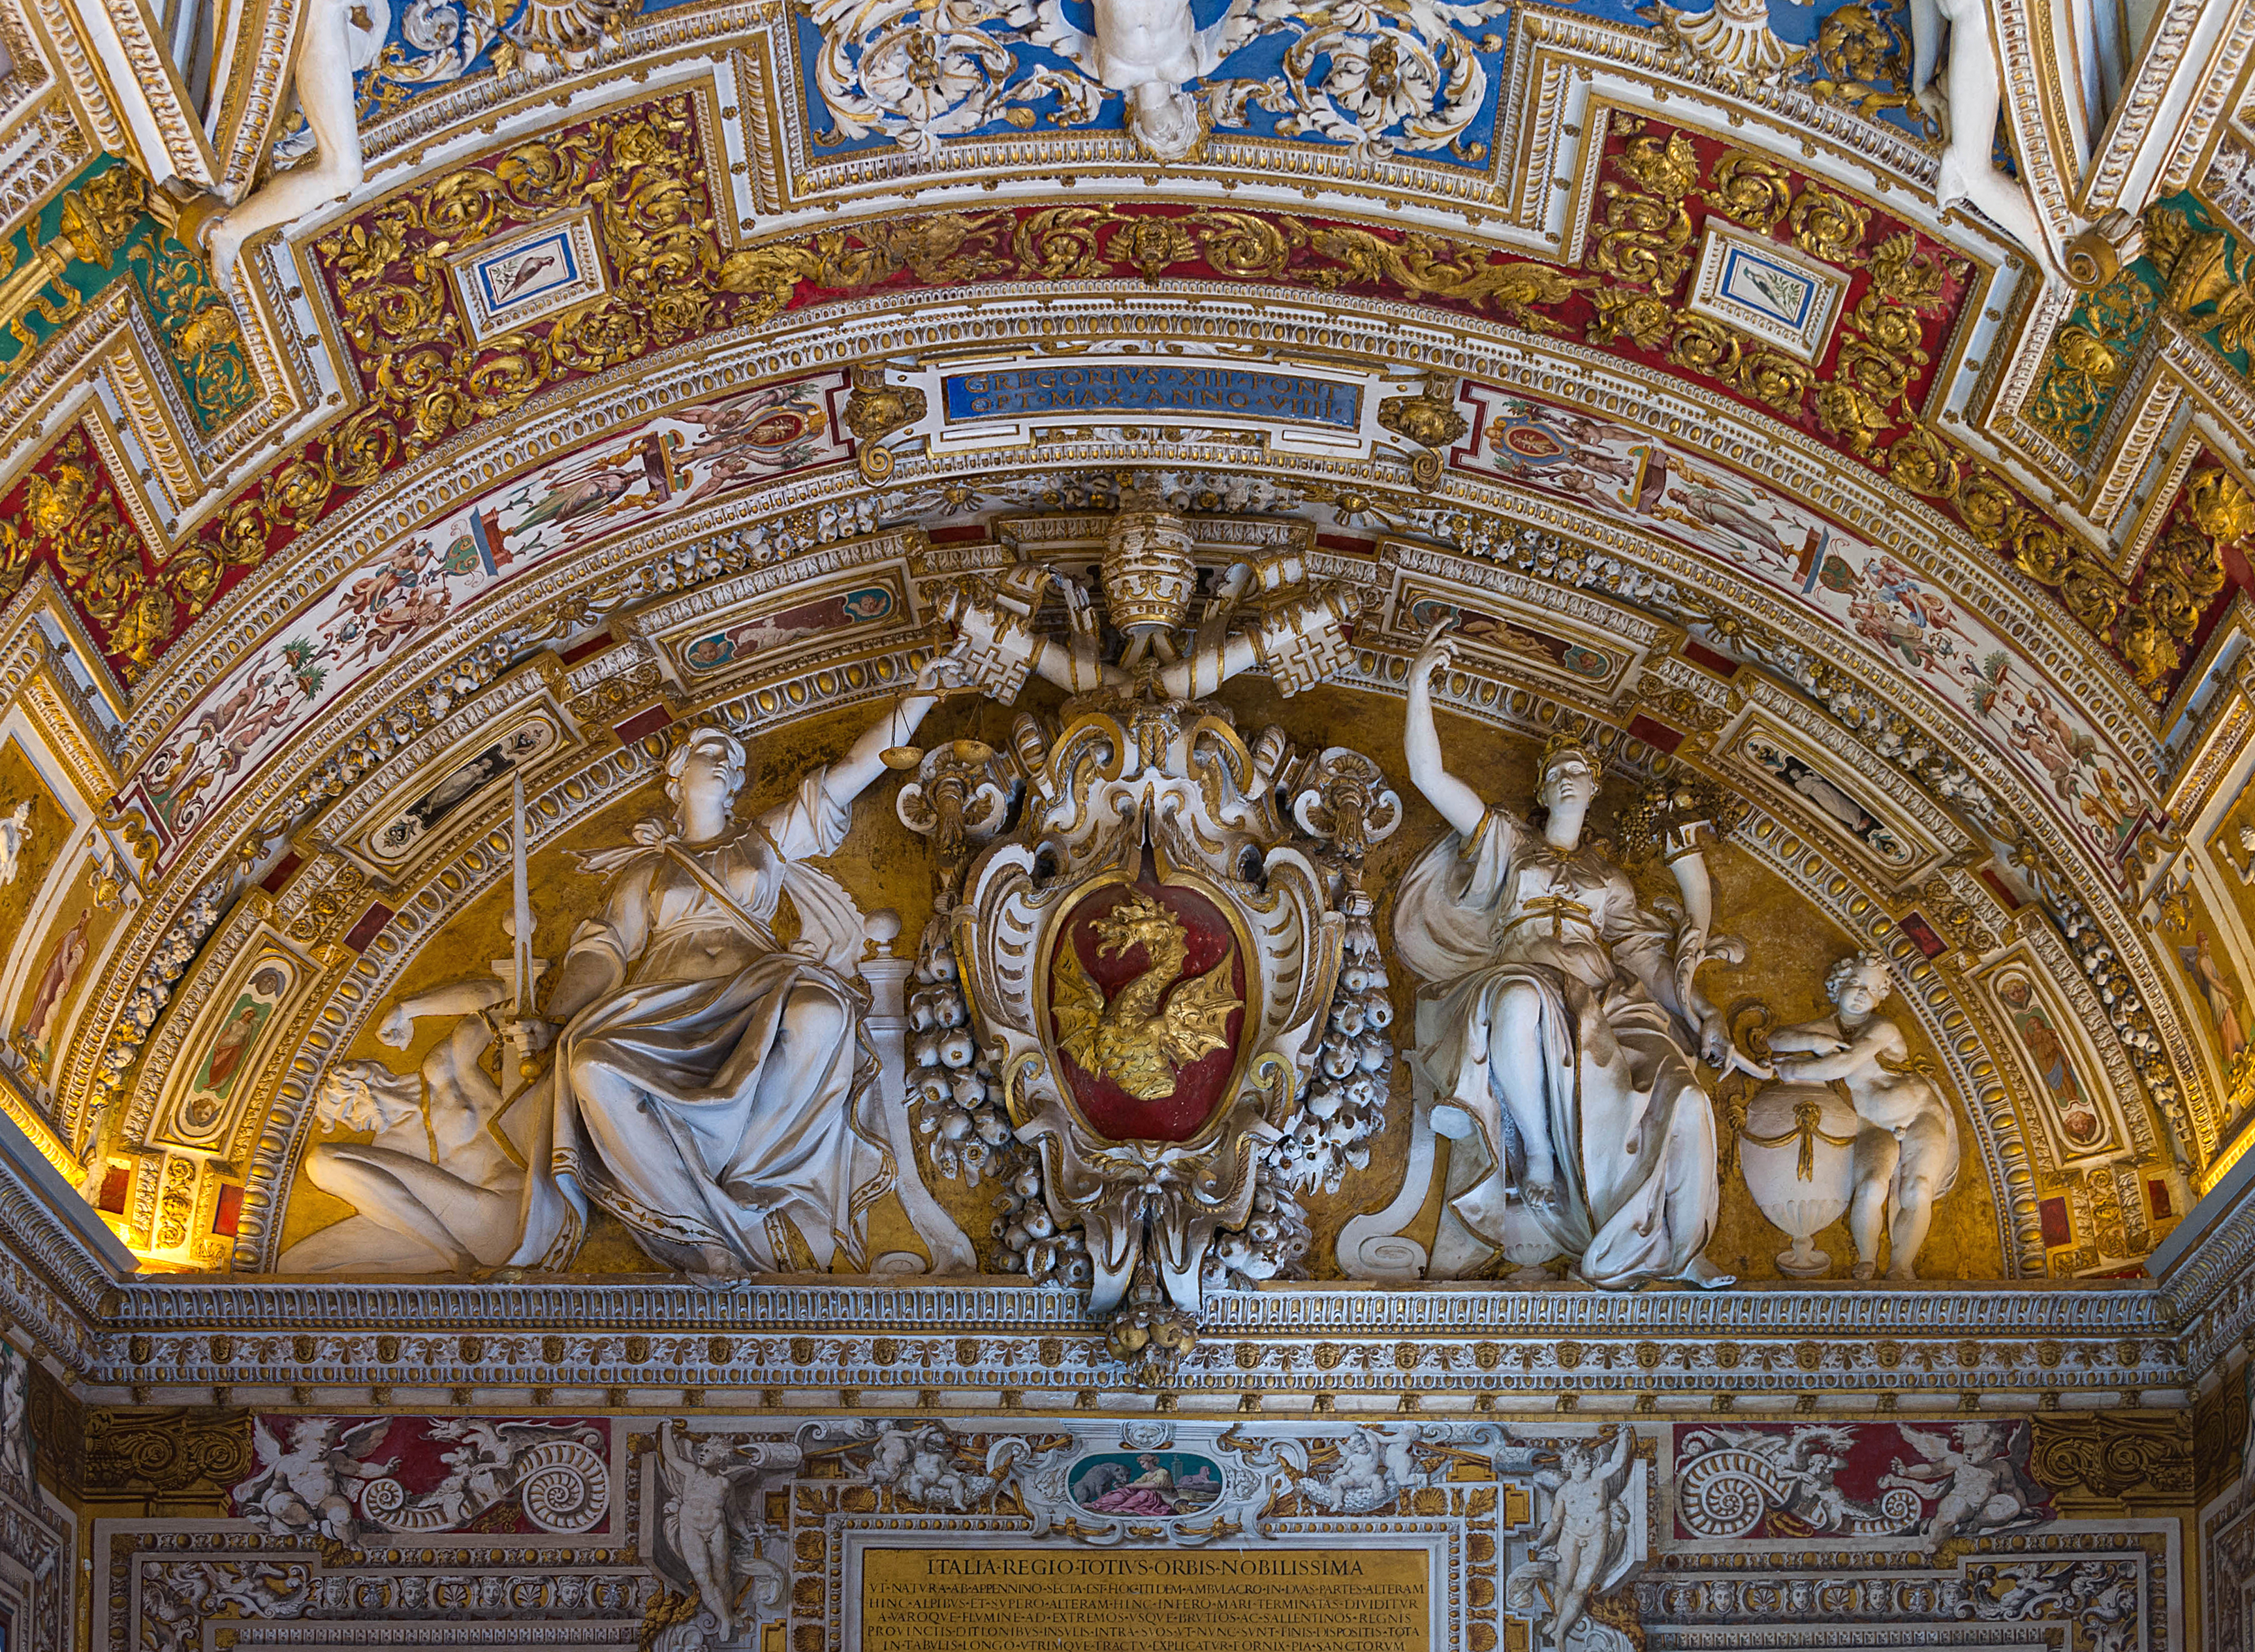 Relief of CoA of Pope Gregorius XIII, Gallery of the geographic maps, part of the ceiling, Vatican City 2